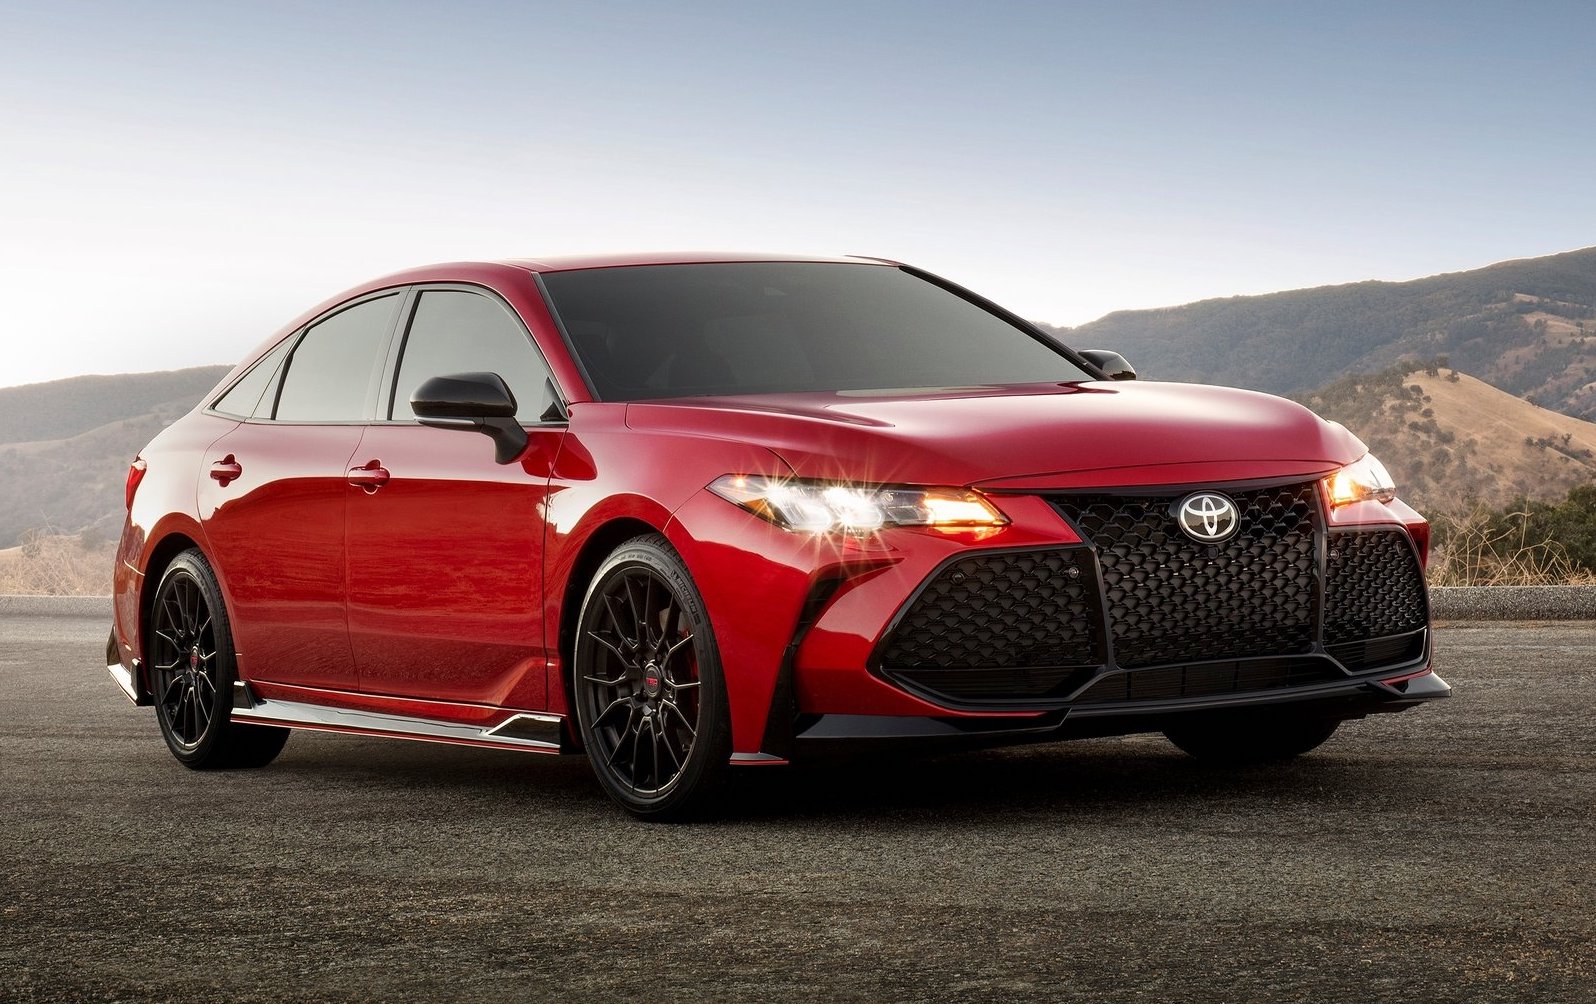 2020 Toyota Camry TRD shows racy appeal | PerformanceDrive